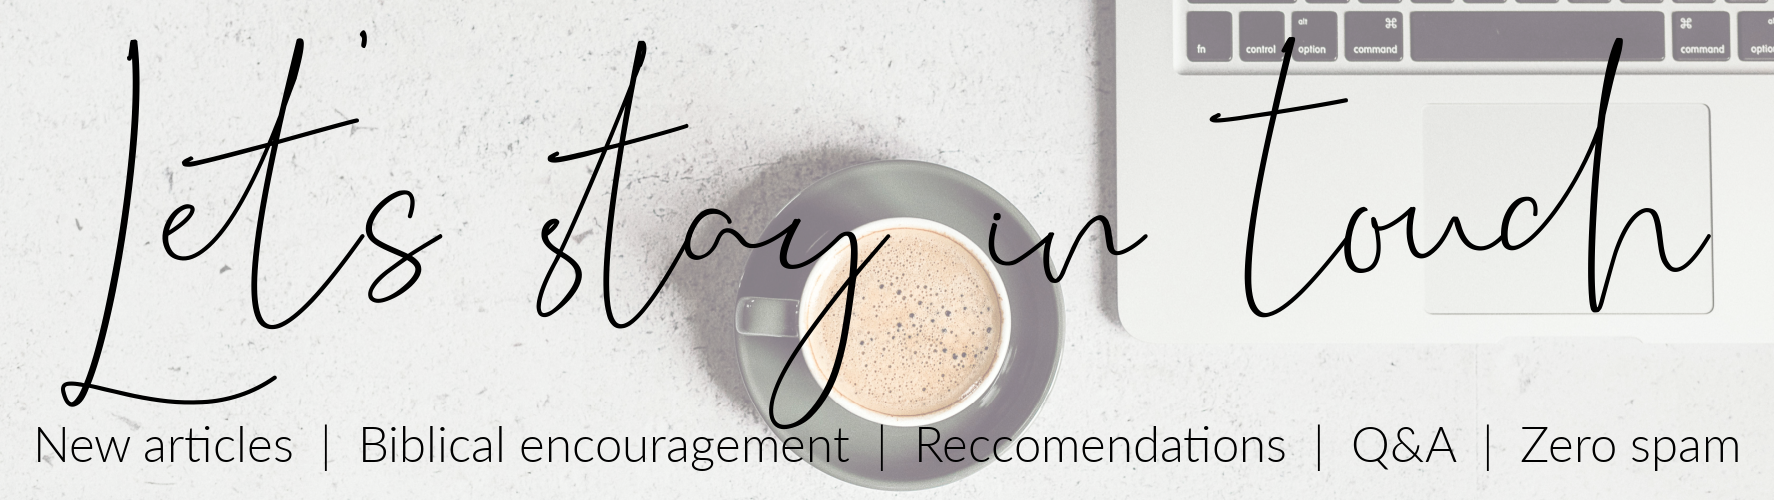 Let's stay in touch! New articles, biblical encouragement, recommendations, q&a, and more! (Zero spam!)